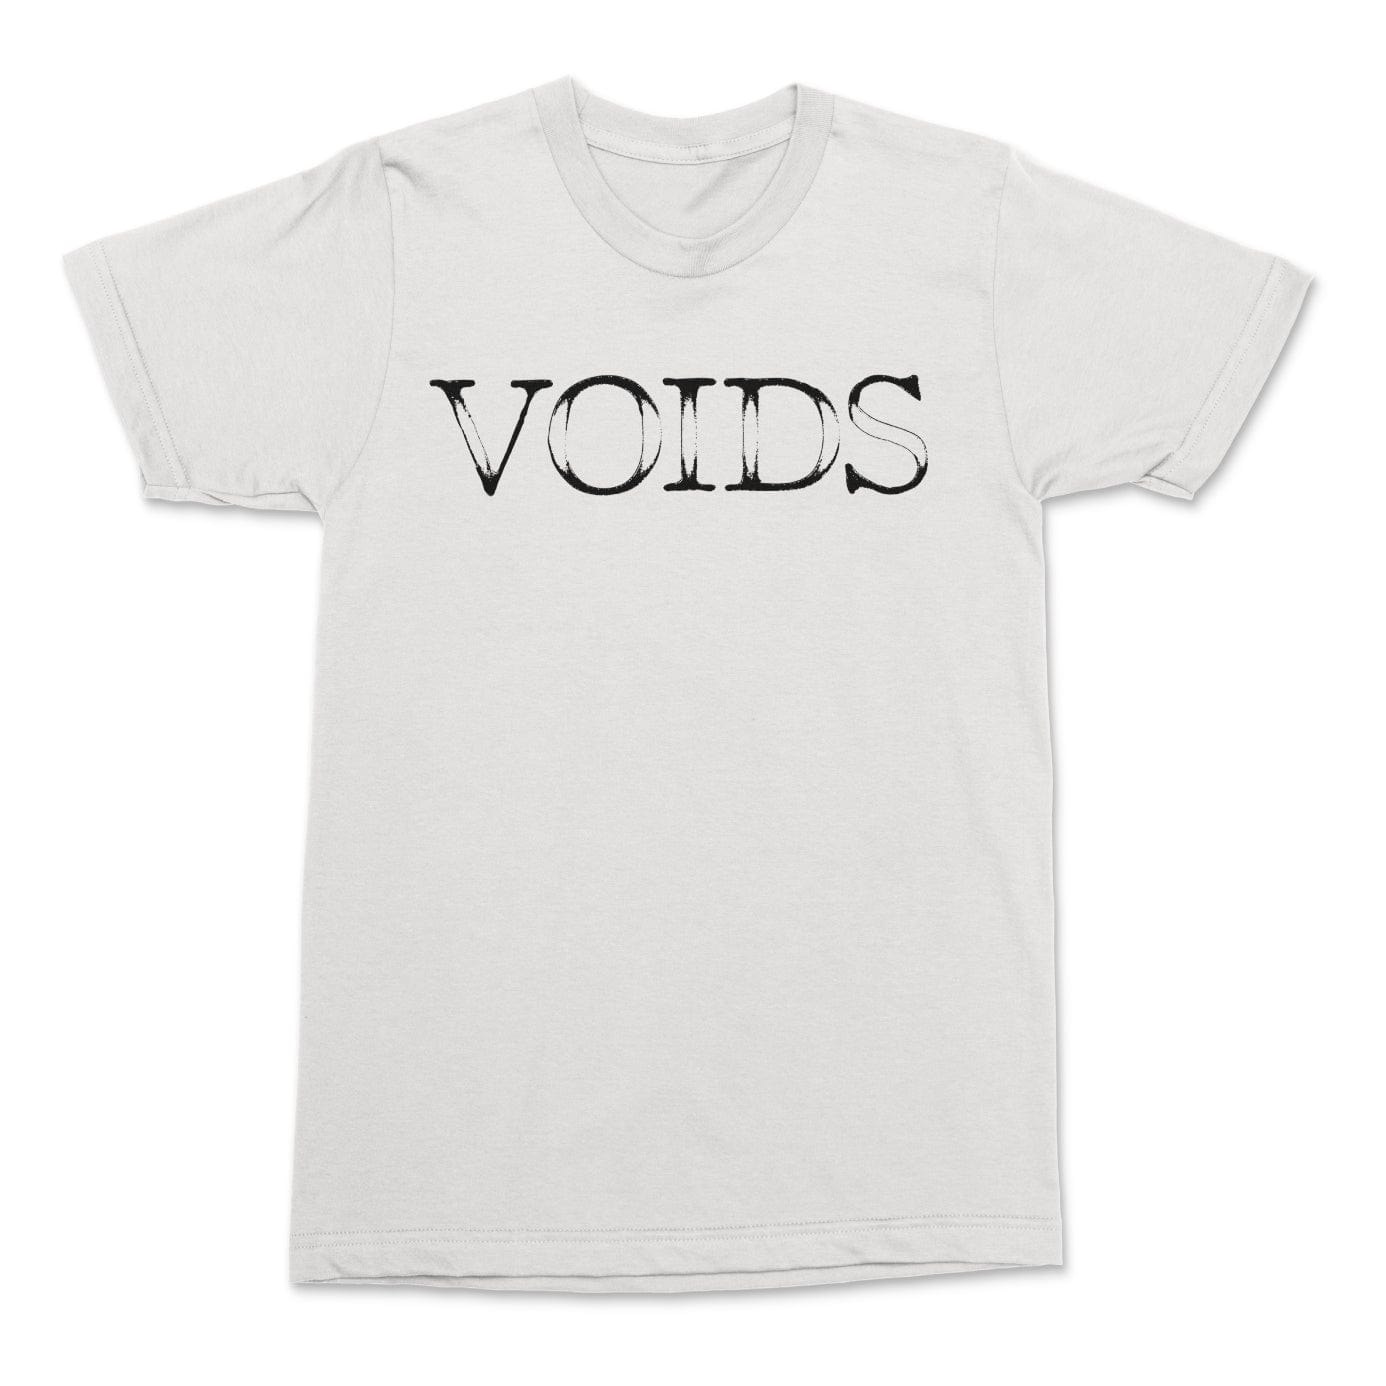 The Flenser Apparel Have a Nice Life "Voids" White Shirt